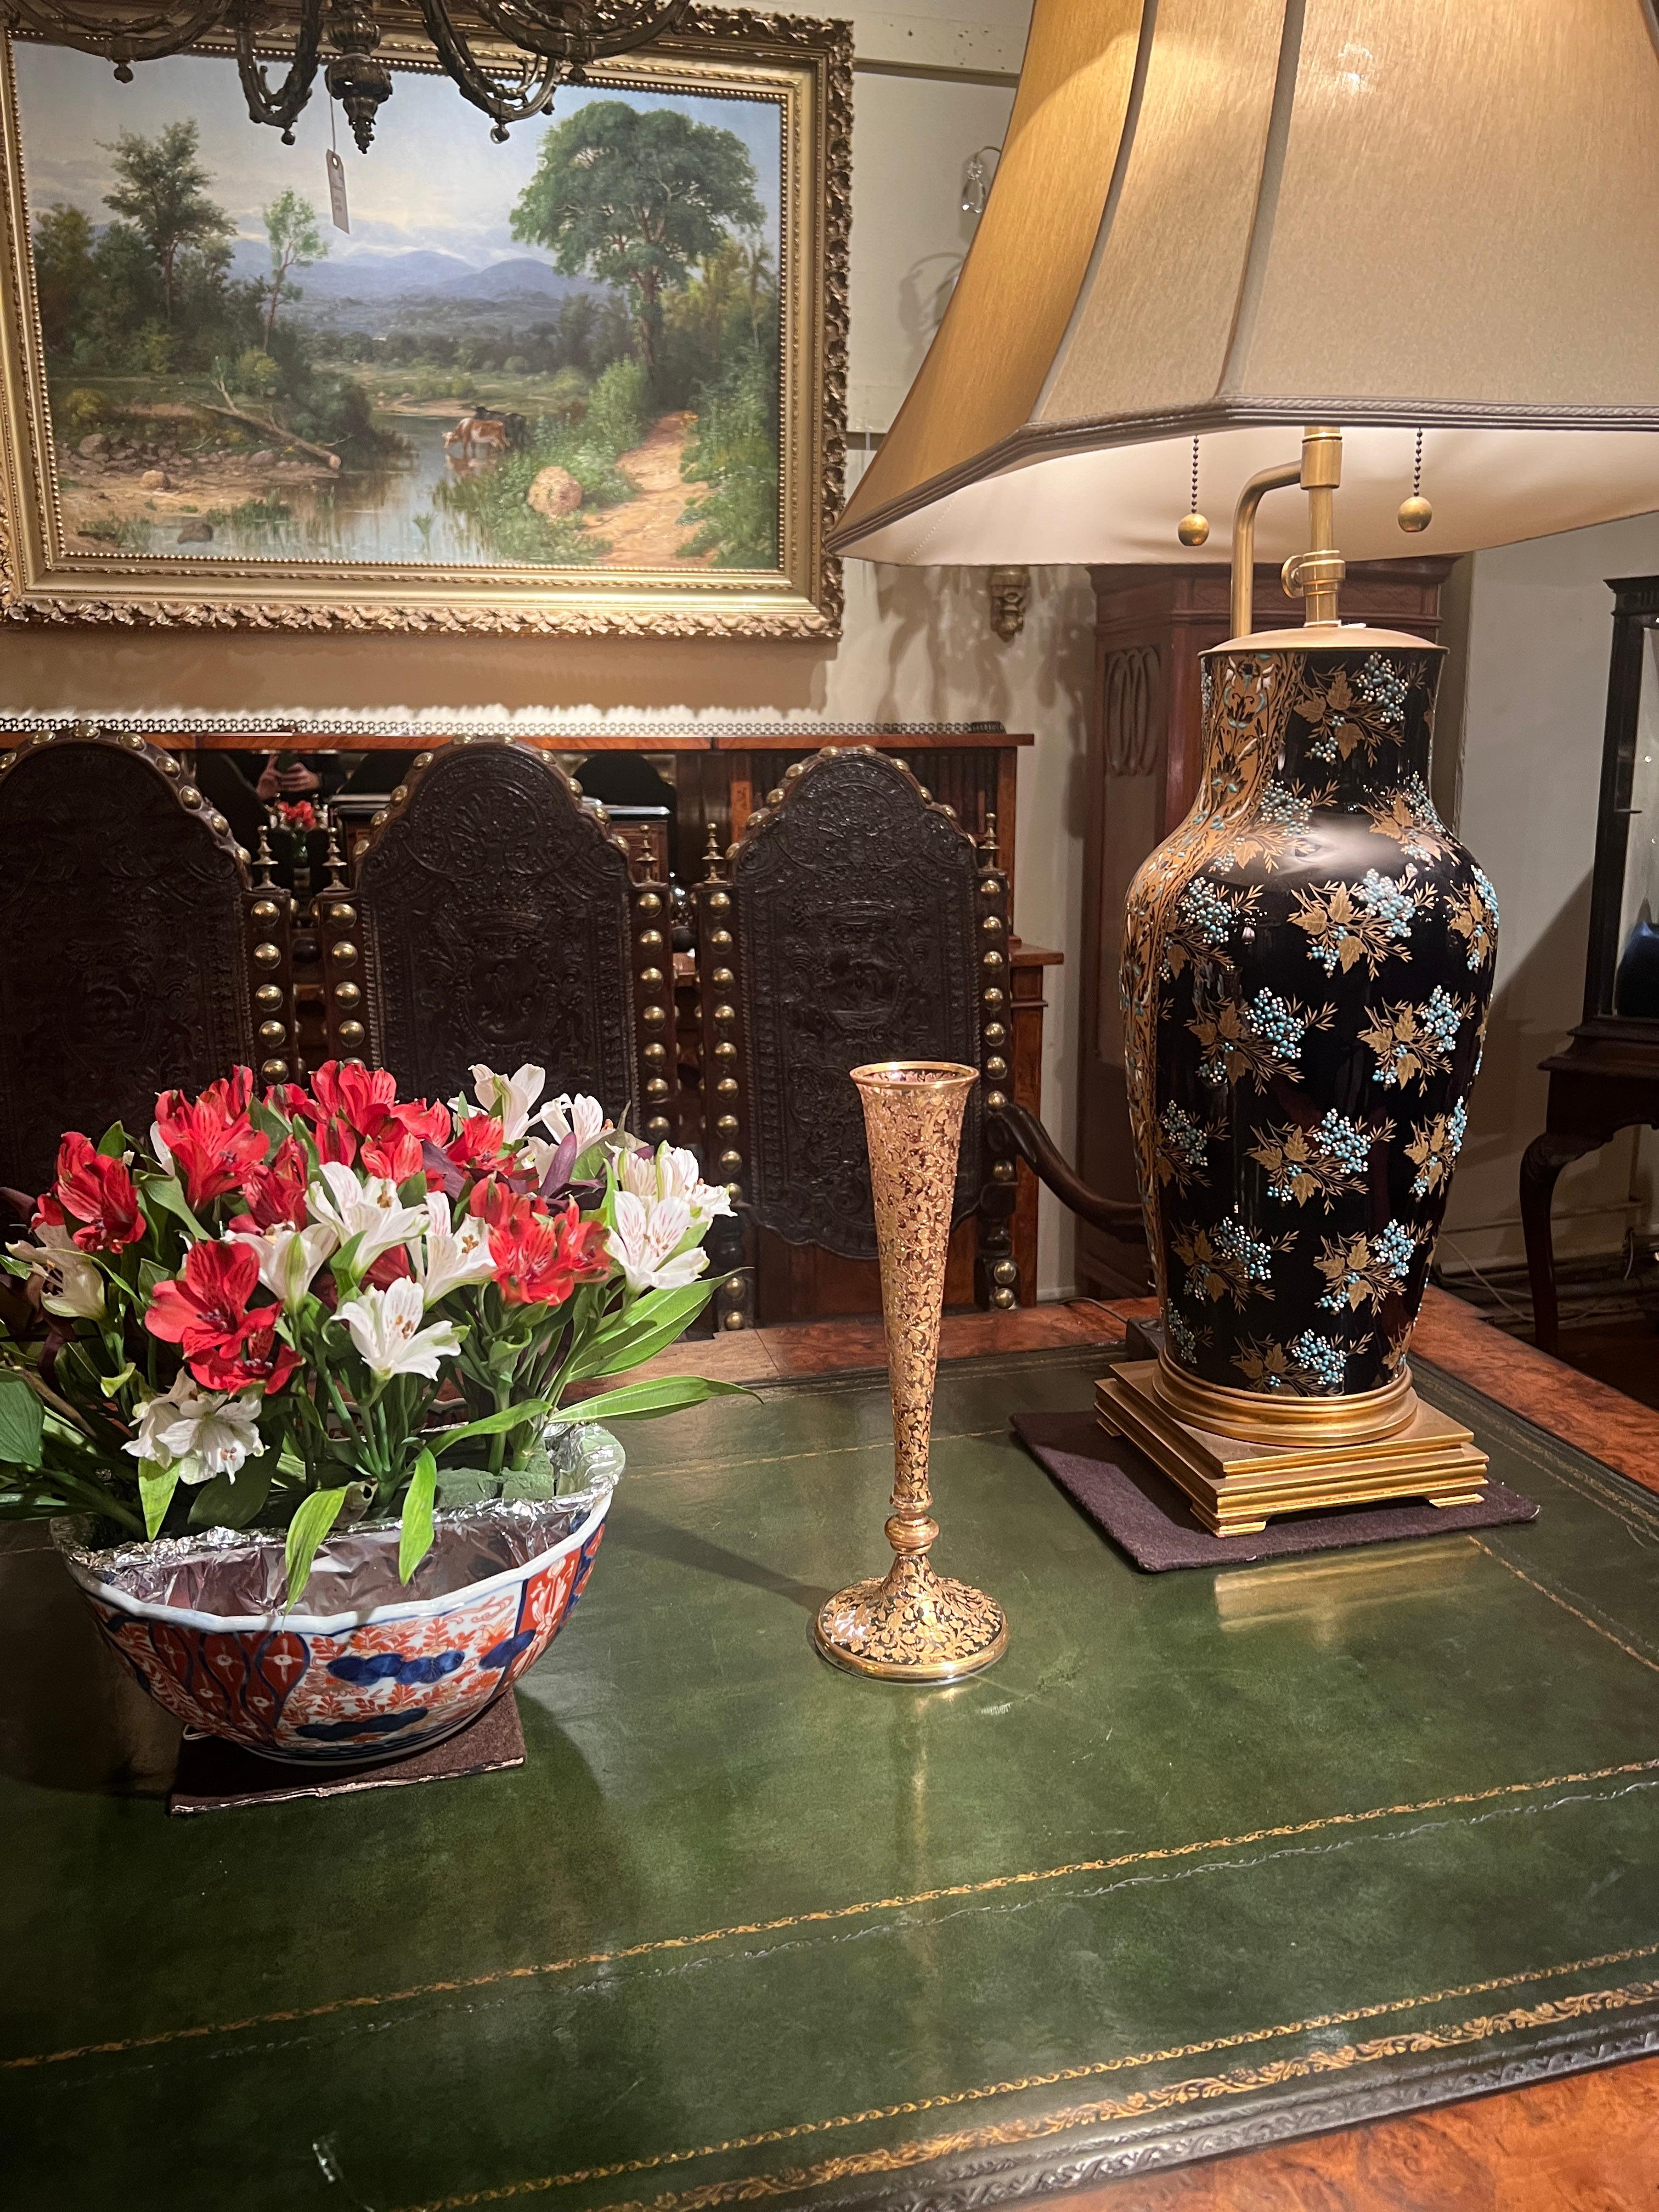 Antique 19th Century German Moser Glass Bud Vase with Gold Overlay, Circa 1885. For Sale 2